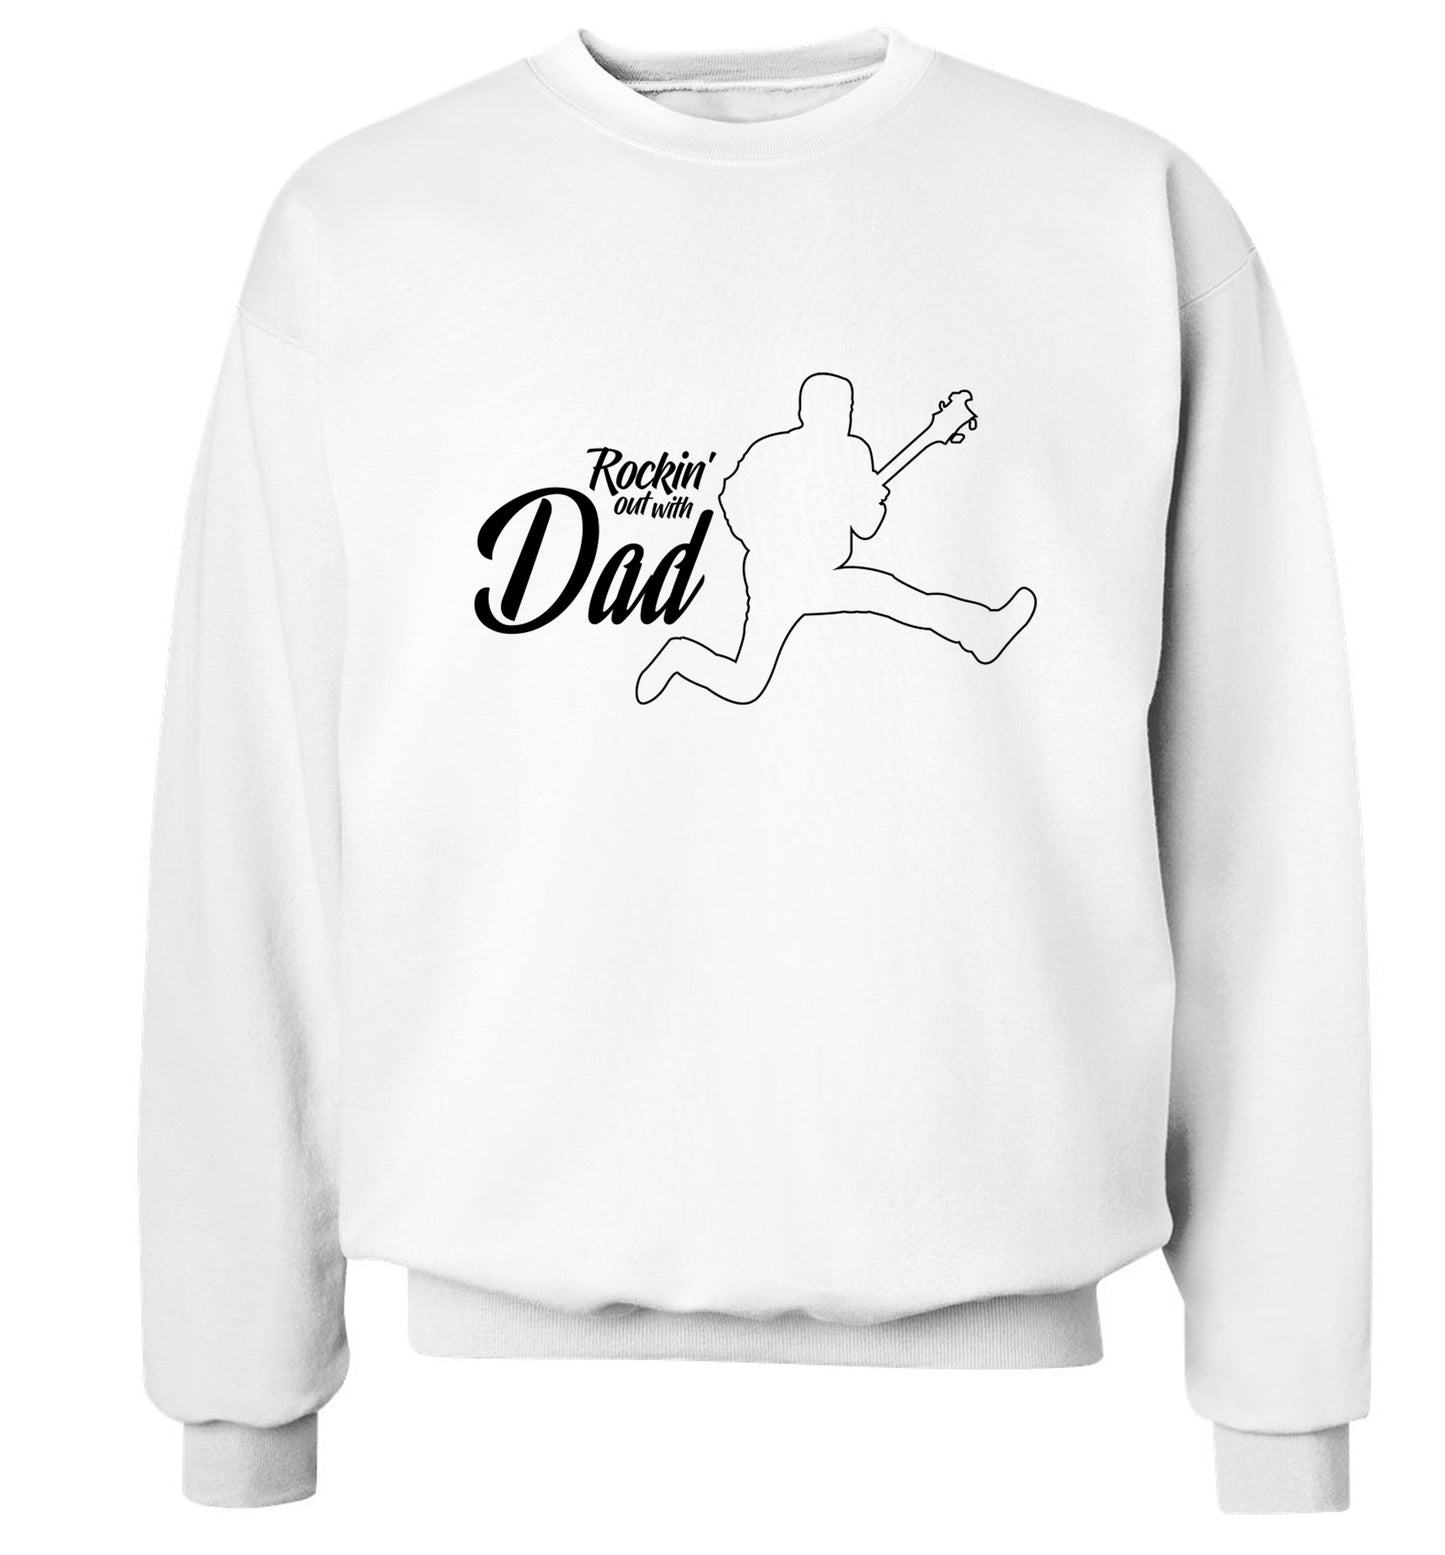 Rockin out with dad Adult's unisex white Sweater 2XL